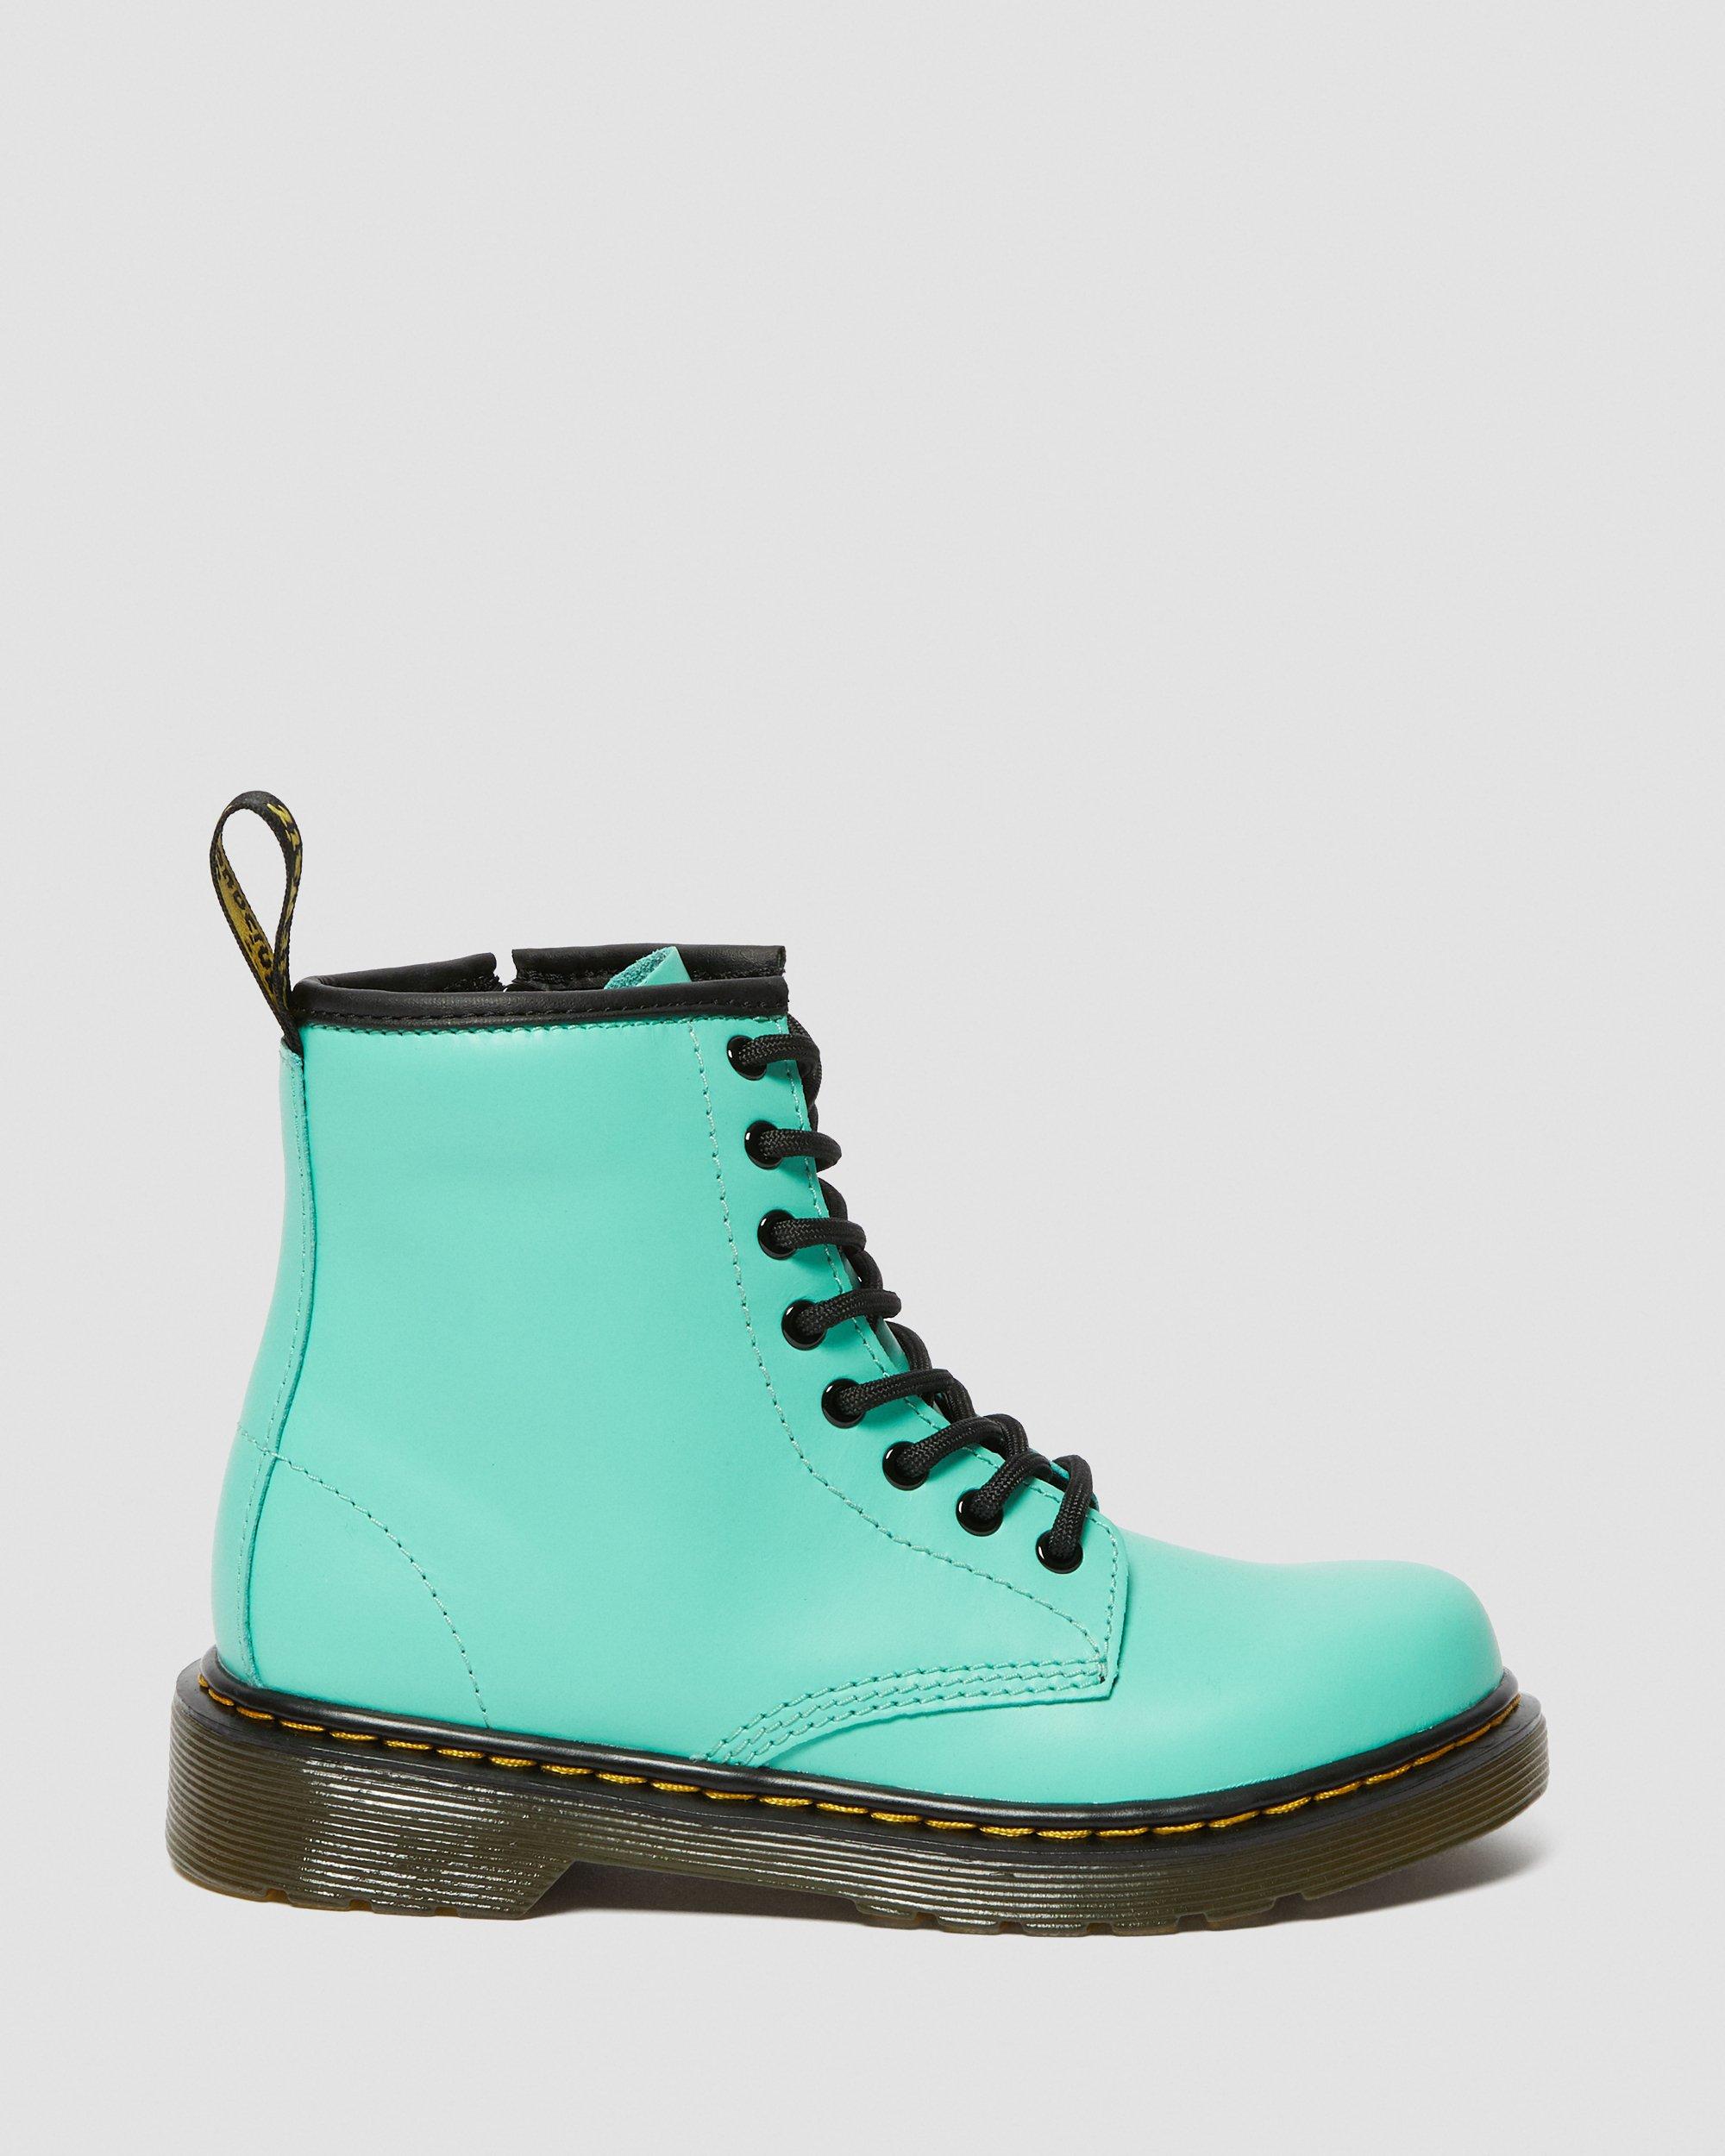 Junior 1460 Leather Lace Up Boots in Peppermint Green | Dr. Martens